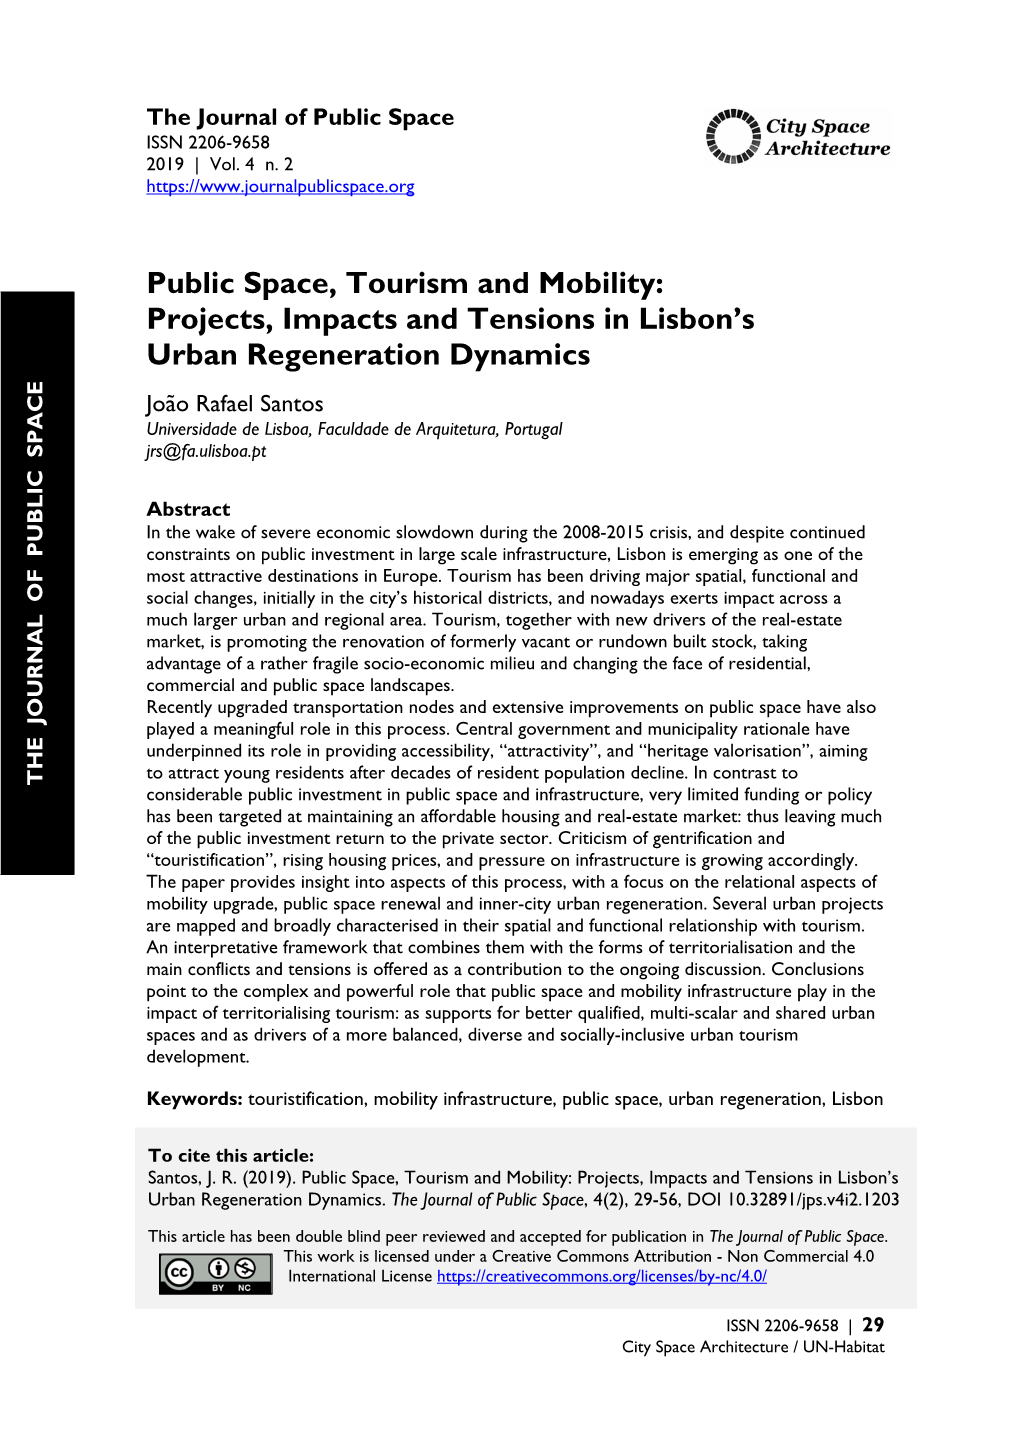 Public Space, Tourism and Mobility: Projects, Impacts and Tensions in Lisbon’S Urban Regeneration Dynamics